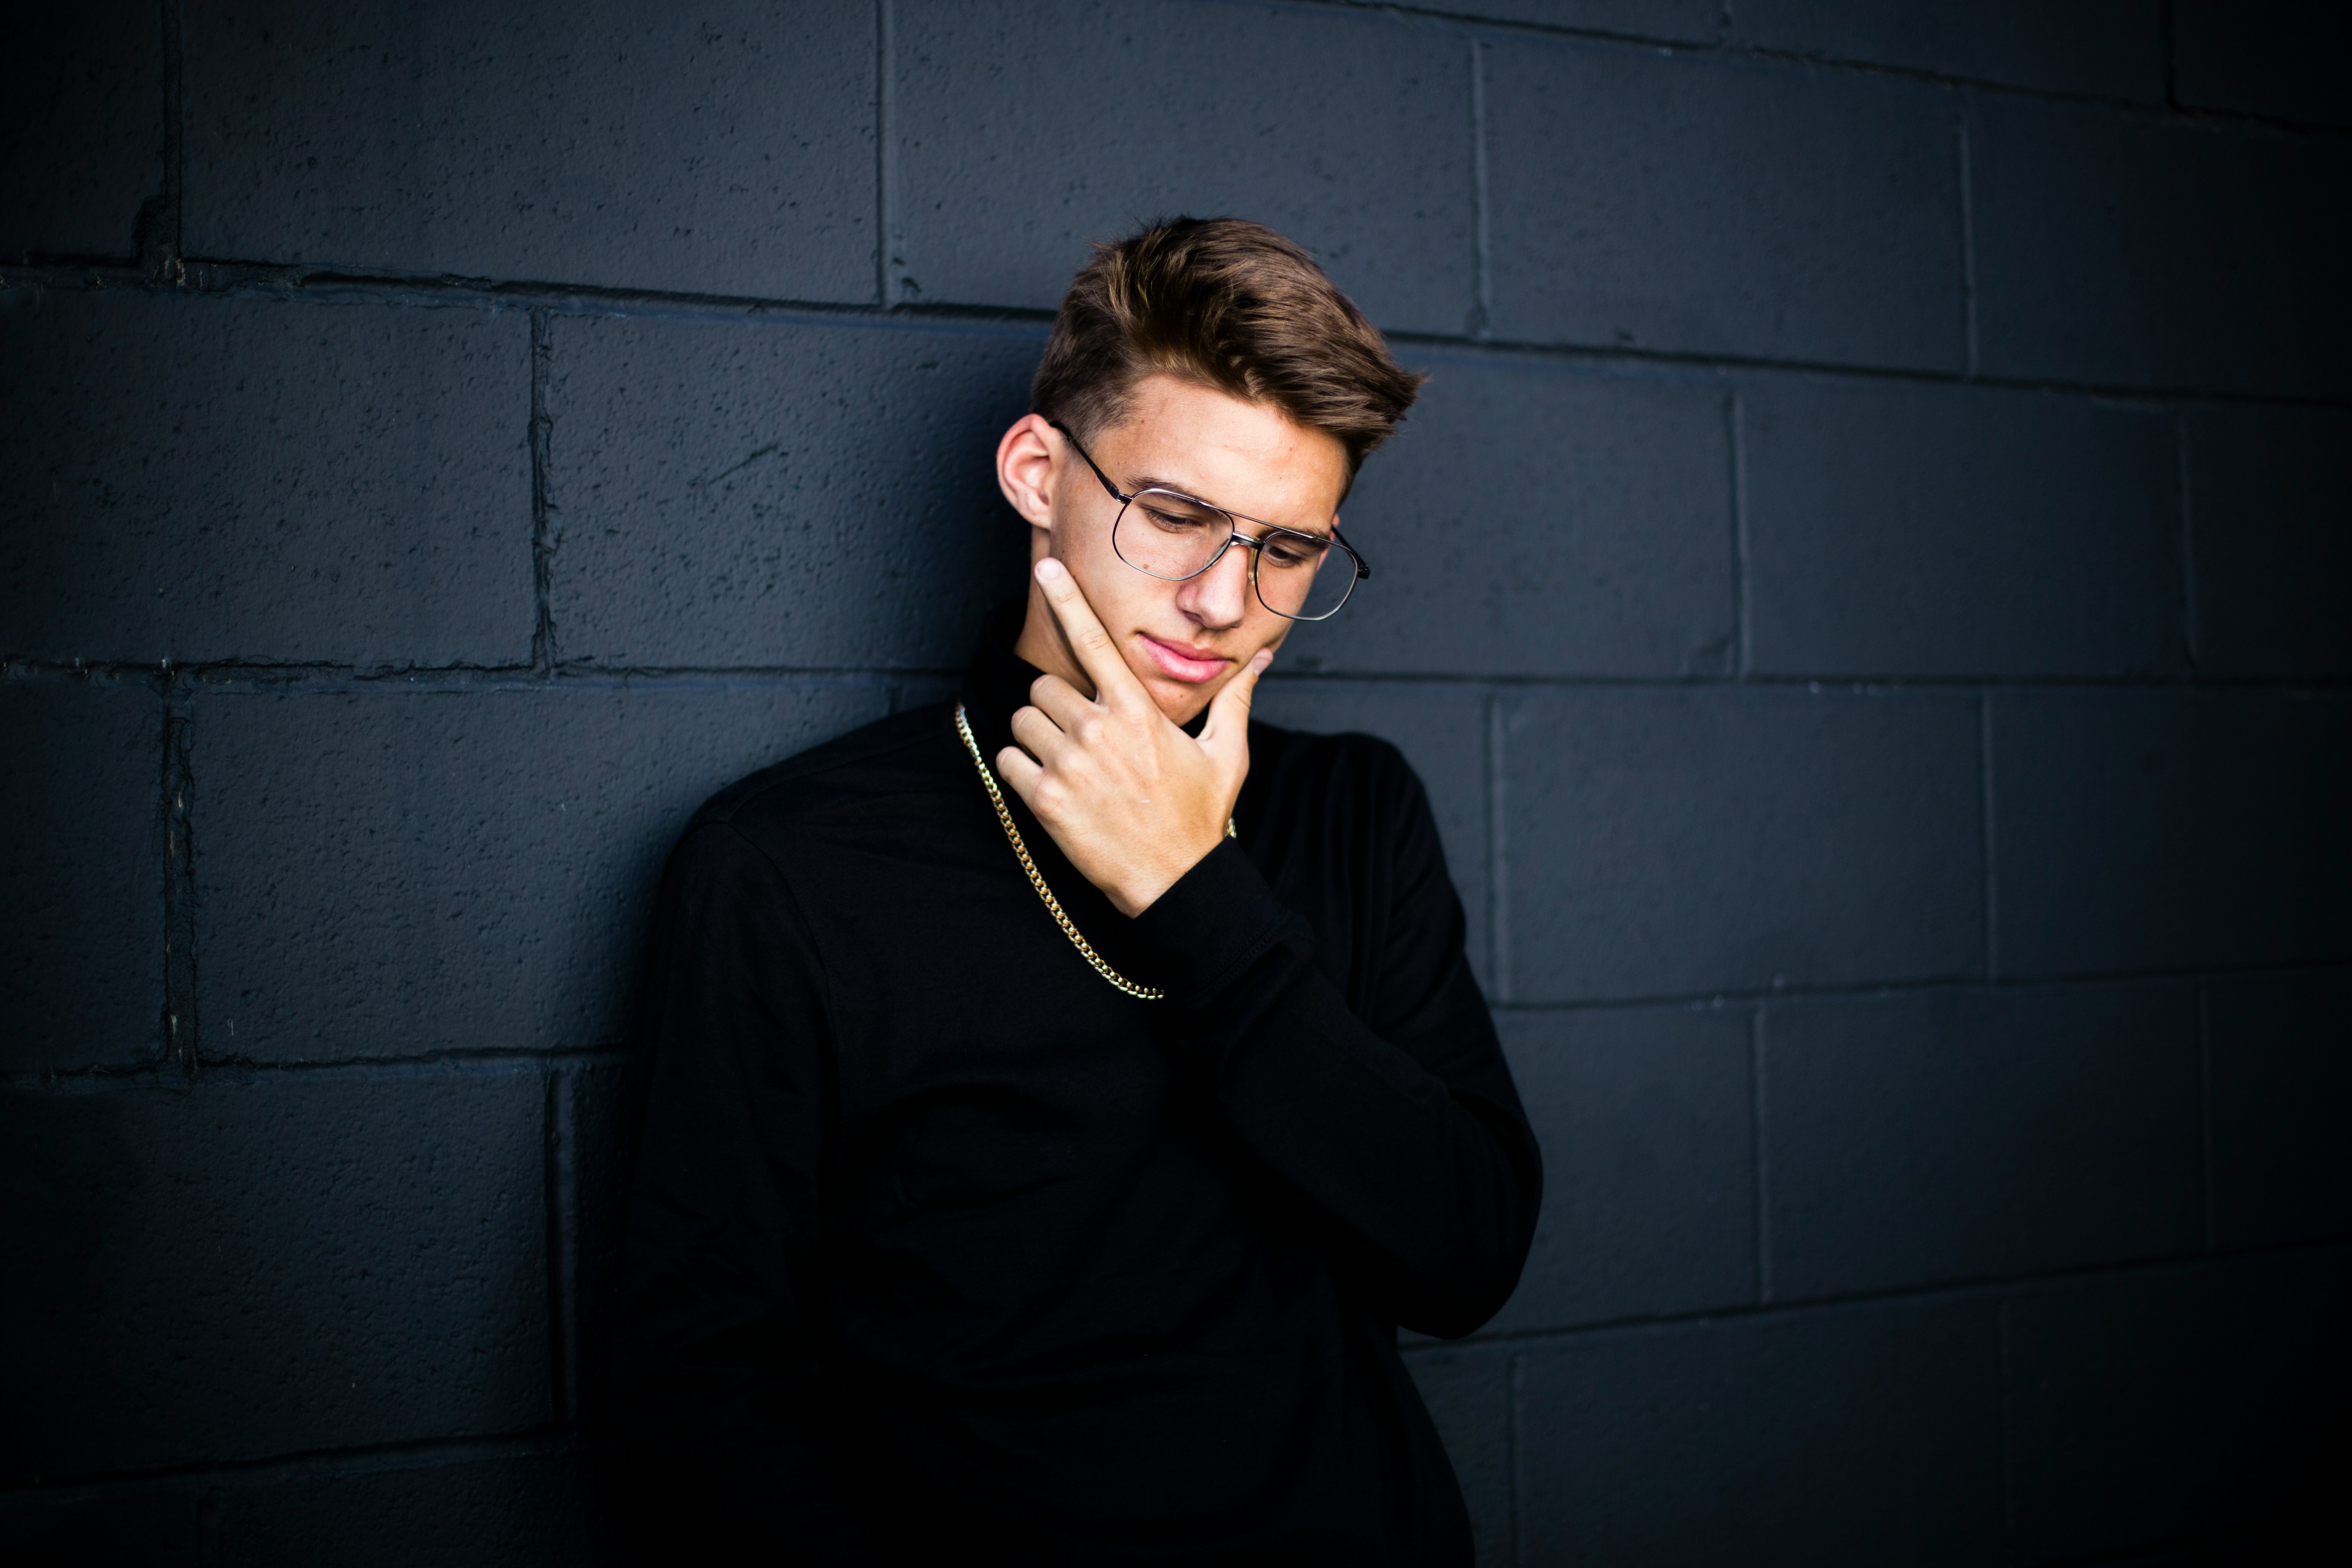 man leaning on wall while looking down wearing eyeglasses and necklace with right hand on chin